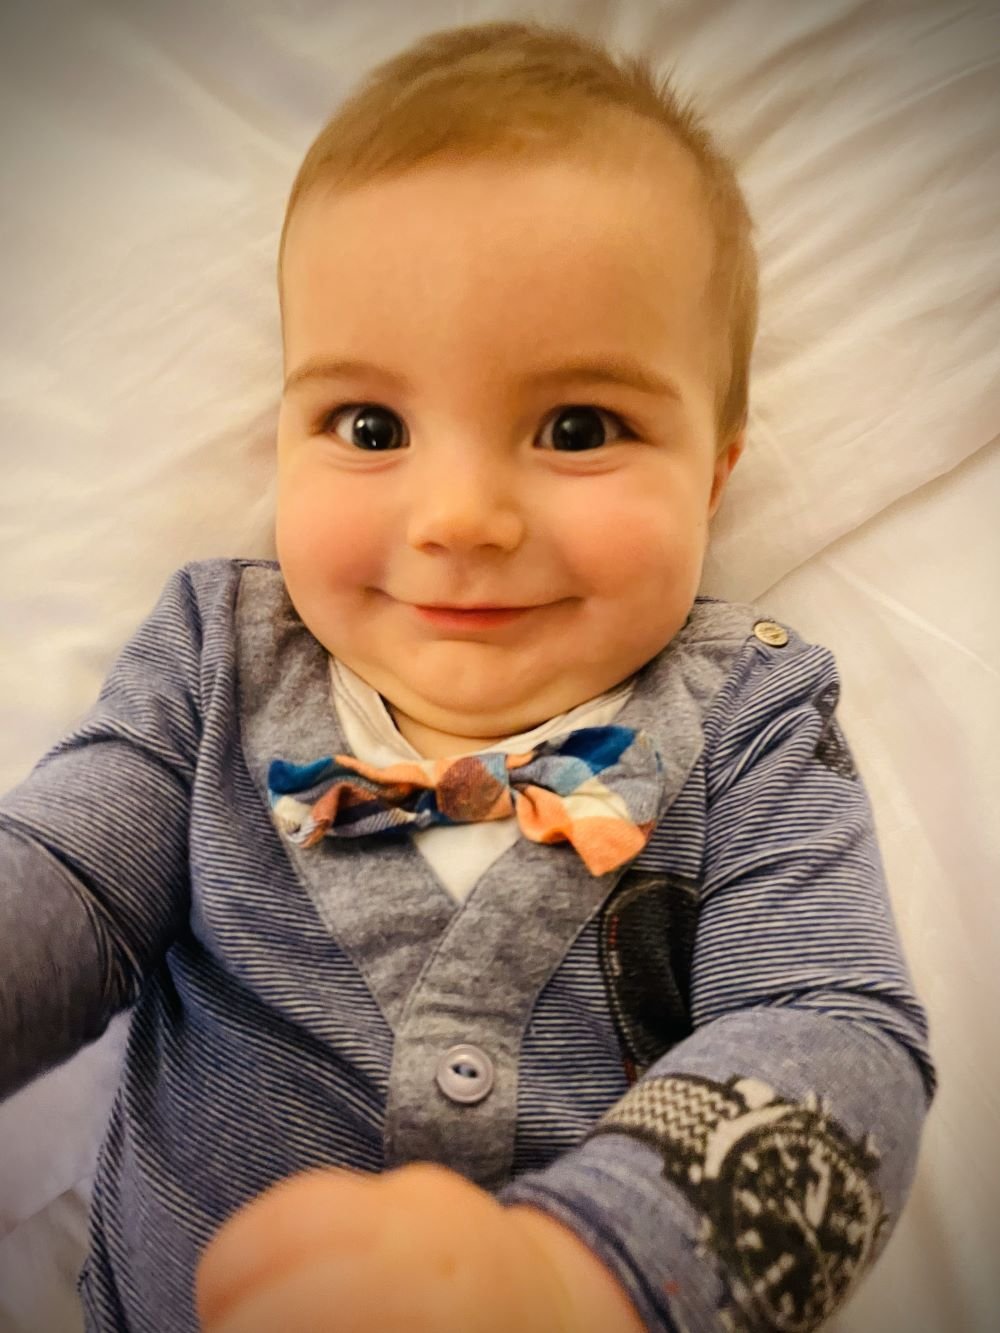 A baby wearing a onesie that looks like it has a bowtie, sunglasses, and watch. Toddler on a Disney Cruise.